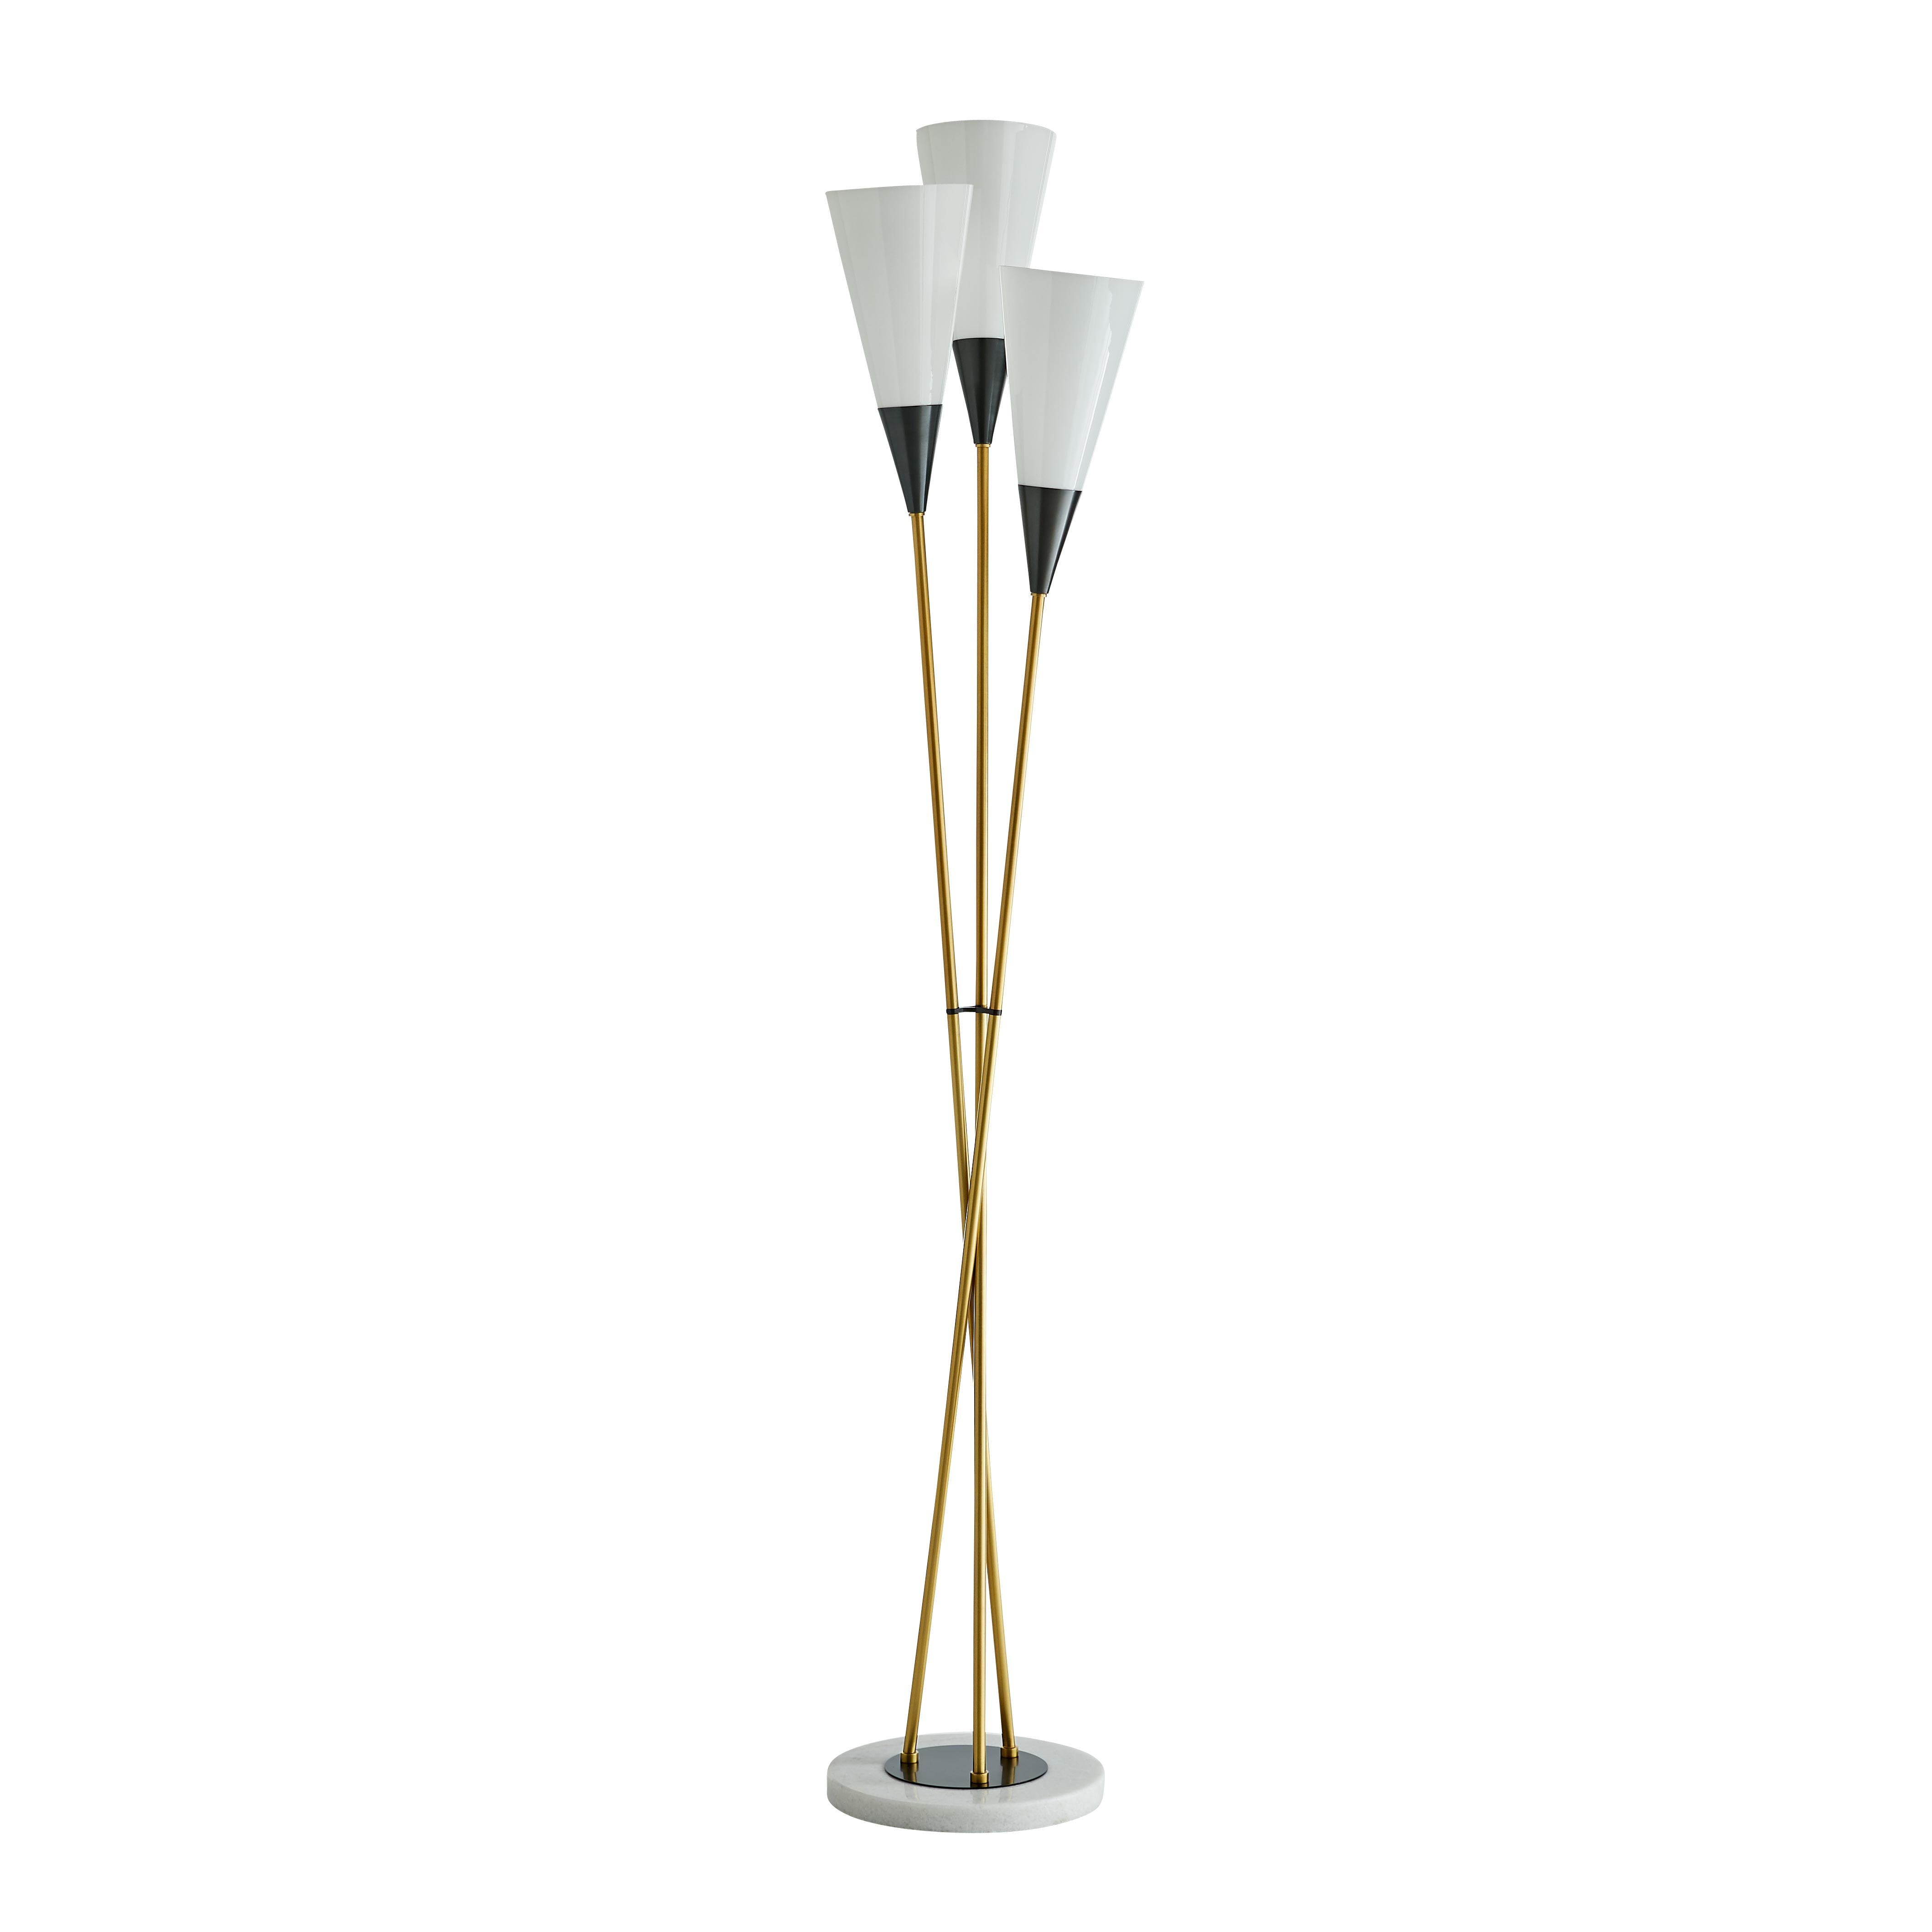 Arteriors Tierney 3 Light 70 Floor Lamp In Gold intended for size 4238 X 4238